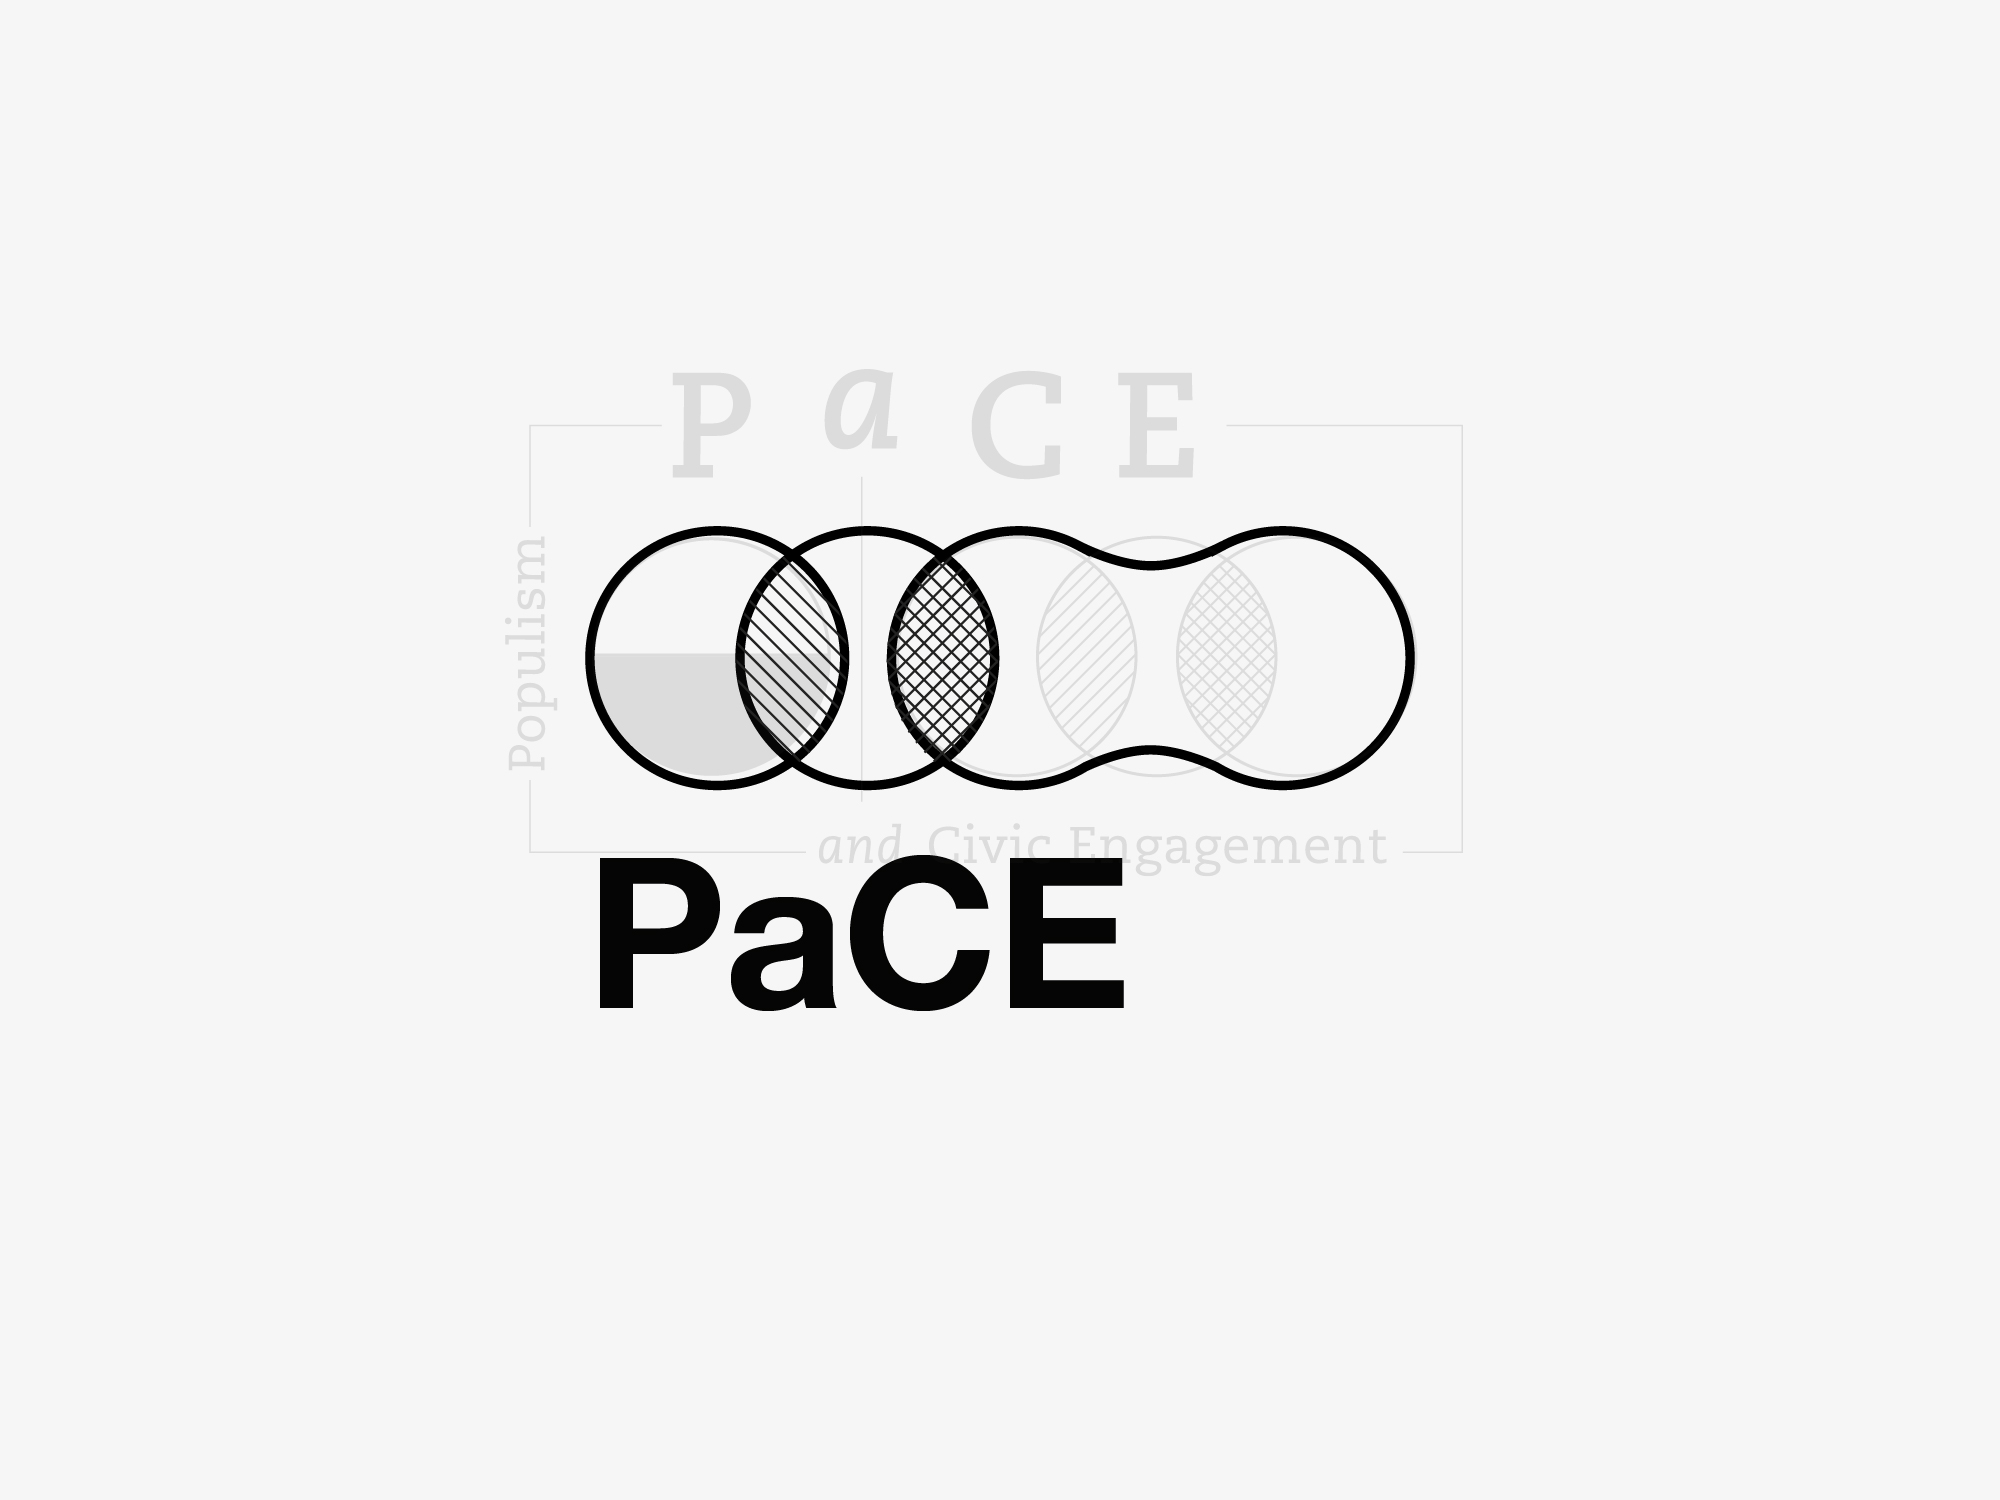 PaCE – Populism and Civic Engagement